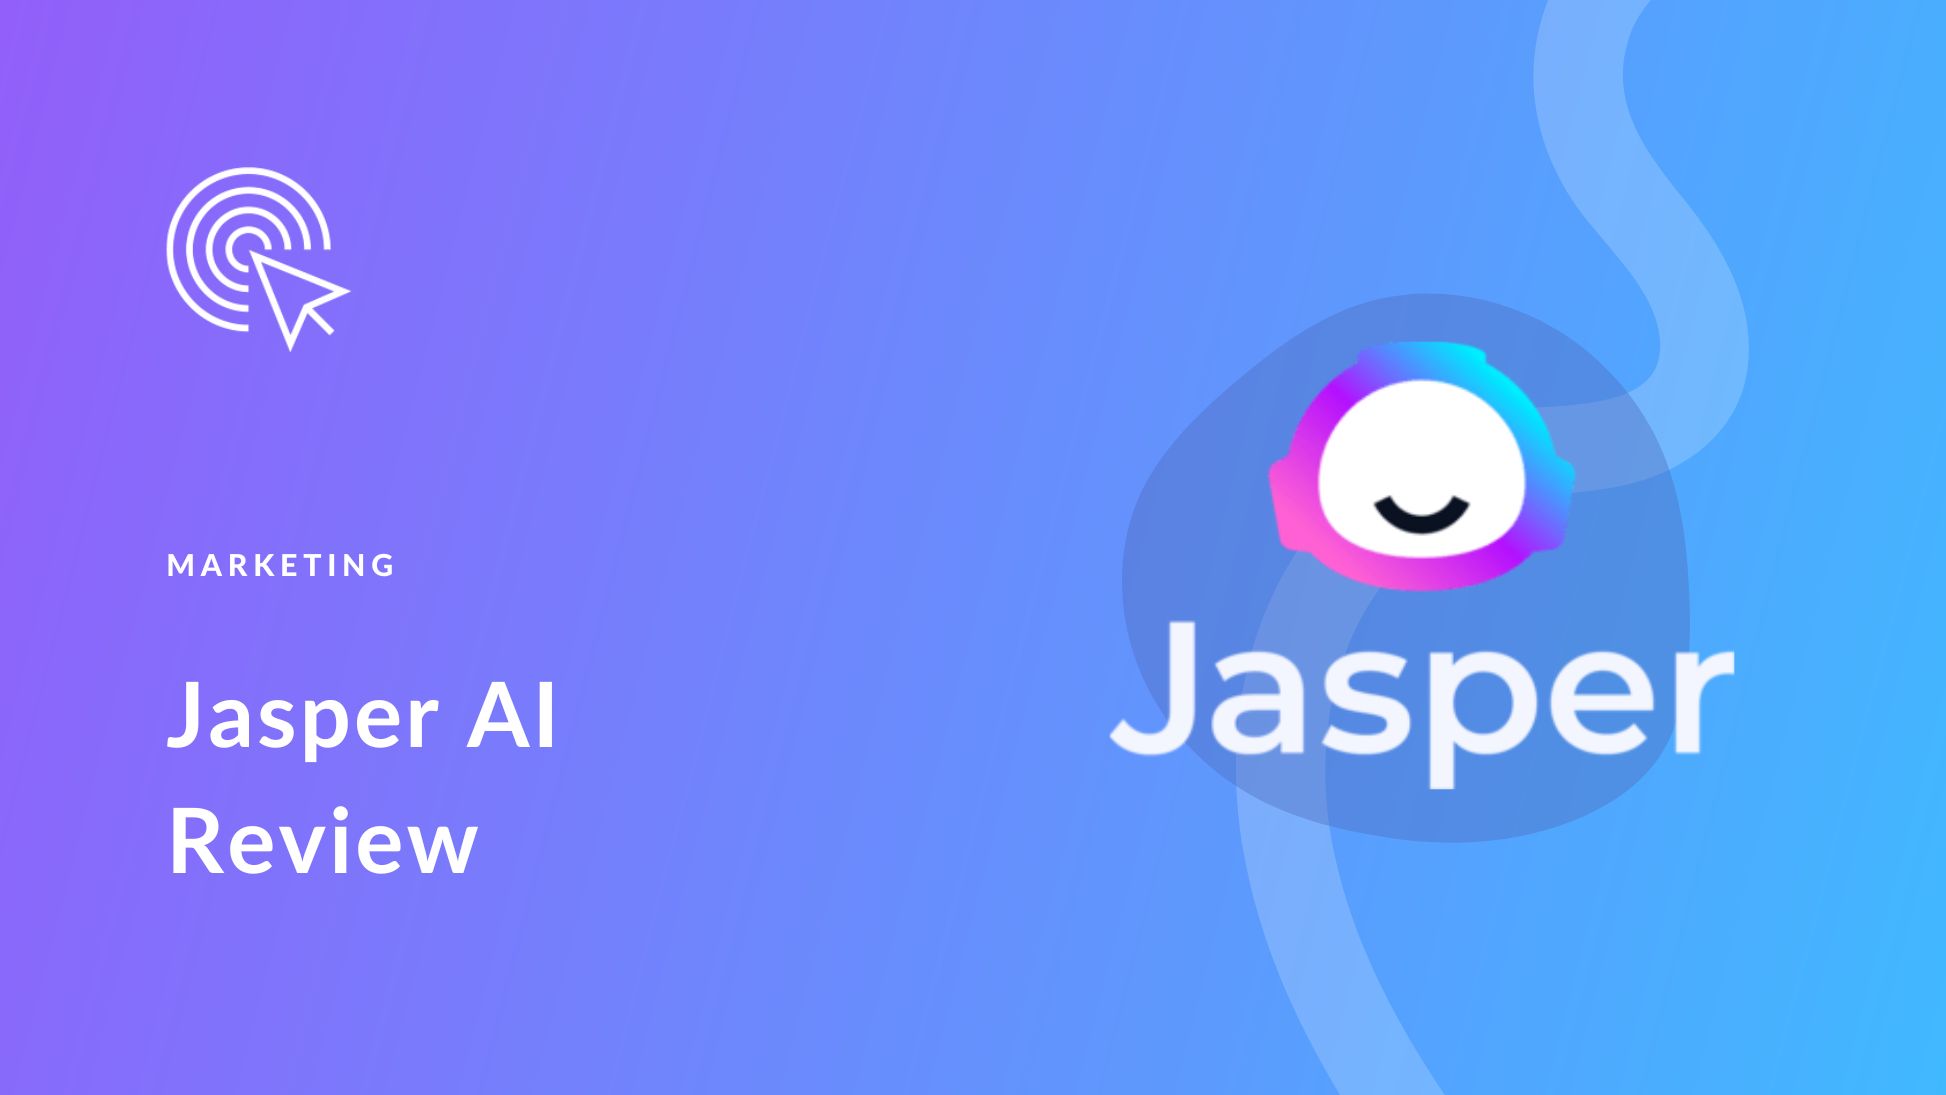 What Type Of Support Is Available For Jasper AI Users? Providing Information On Customer Support For Jasper AI. Jasper AI User Support Technical Assistance, Help Resources